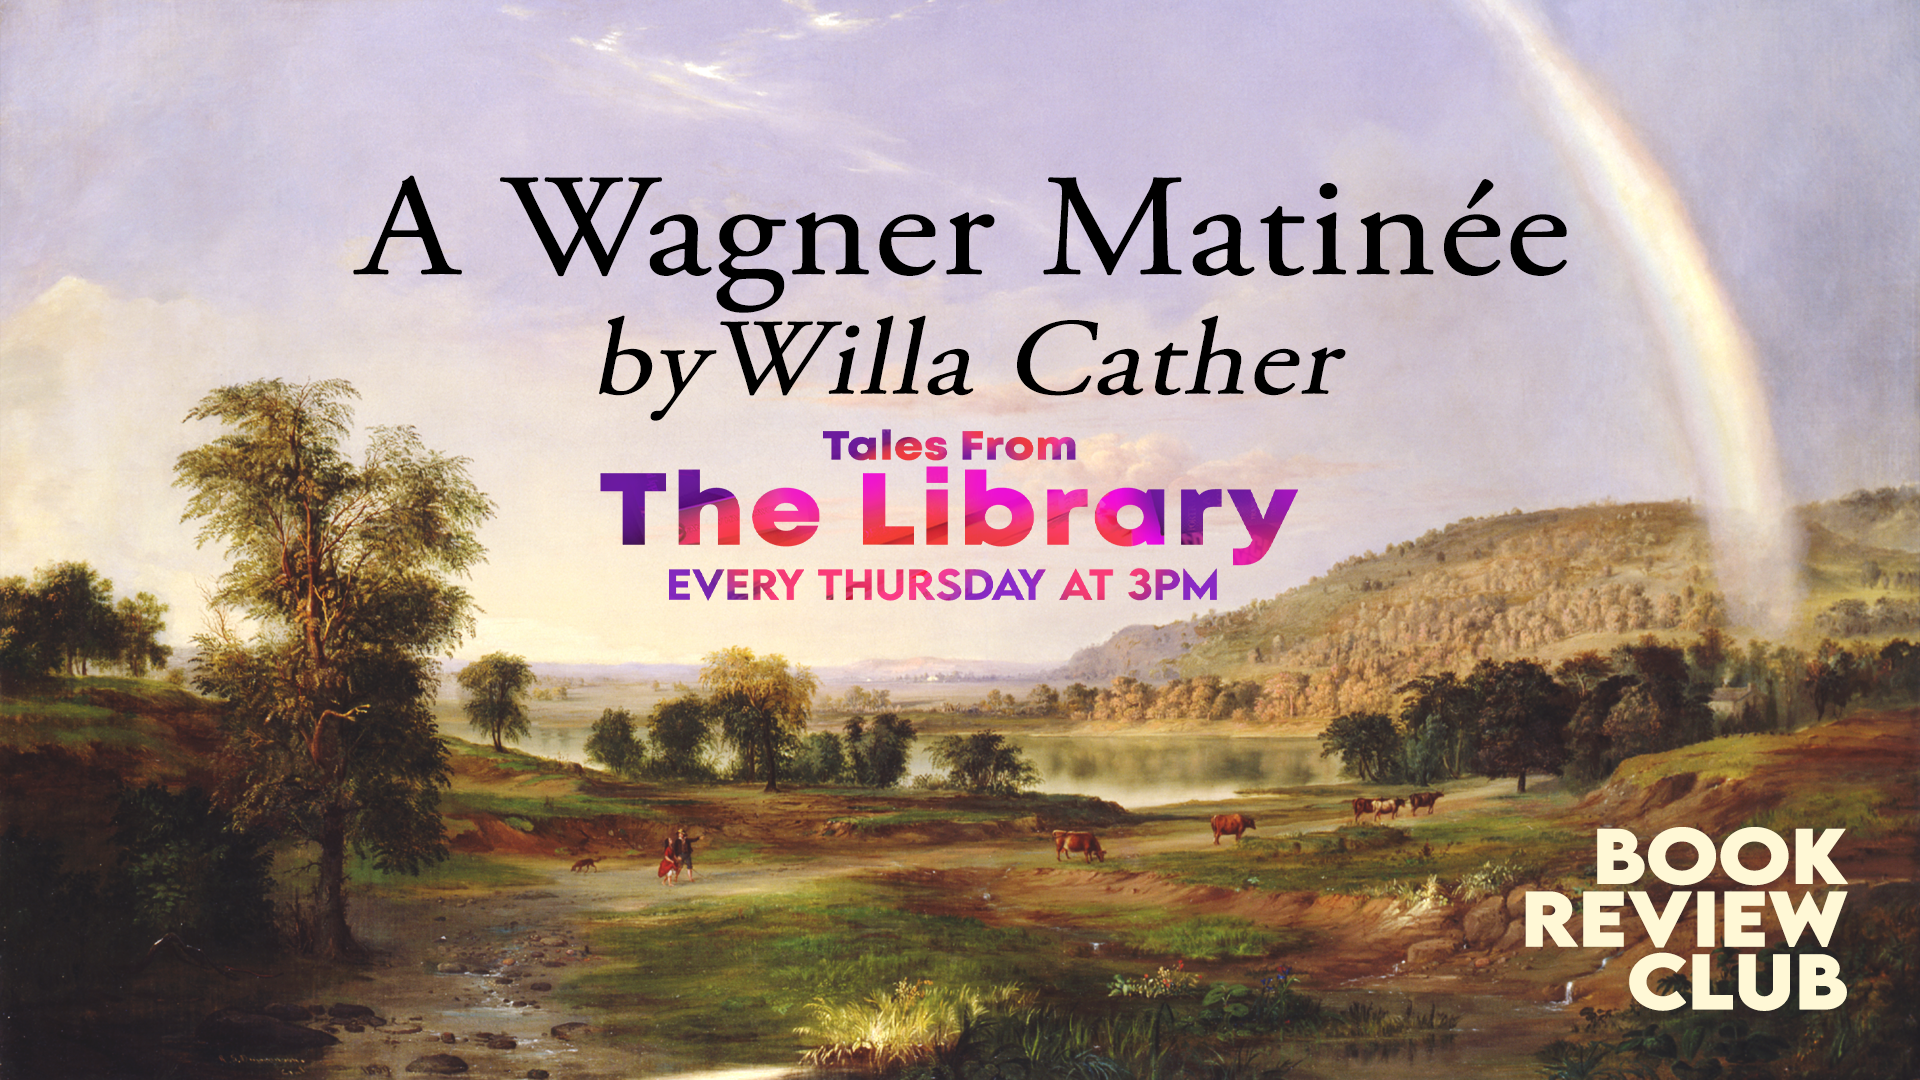 Tales From The Library - A Wagner Matinee